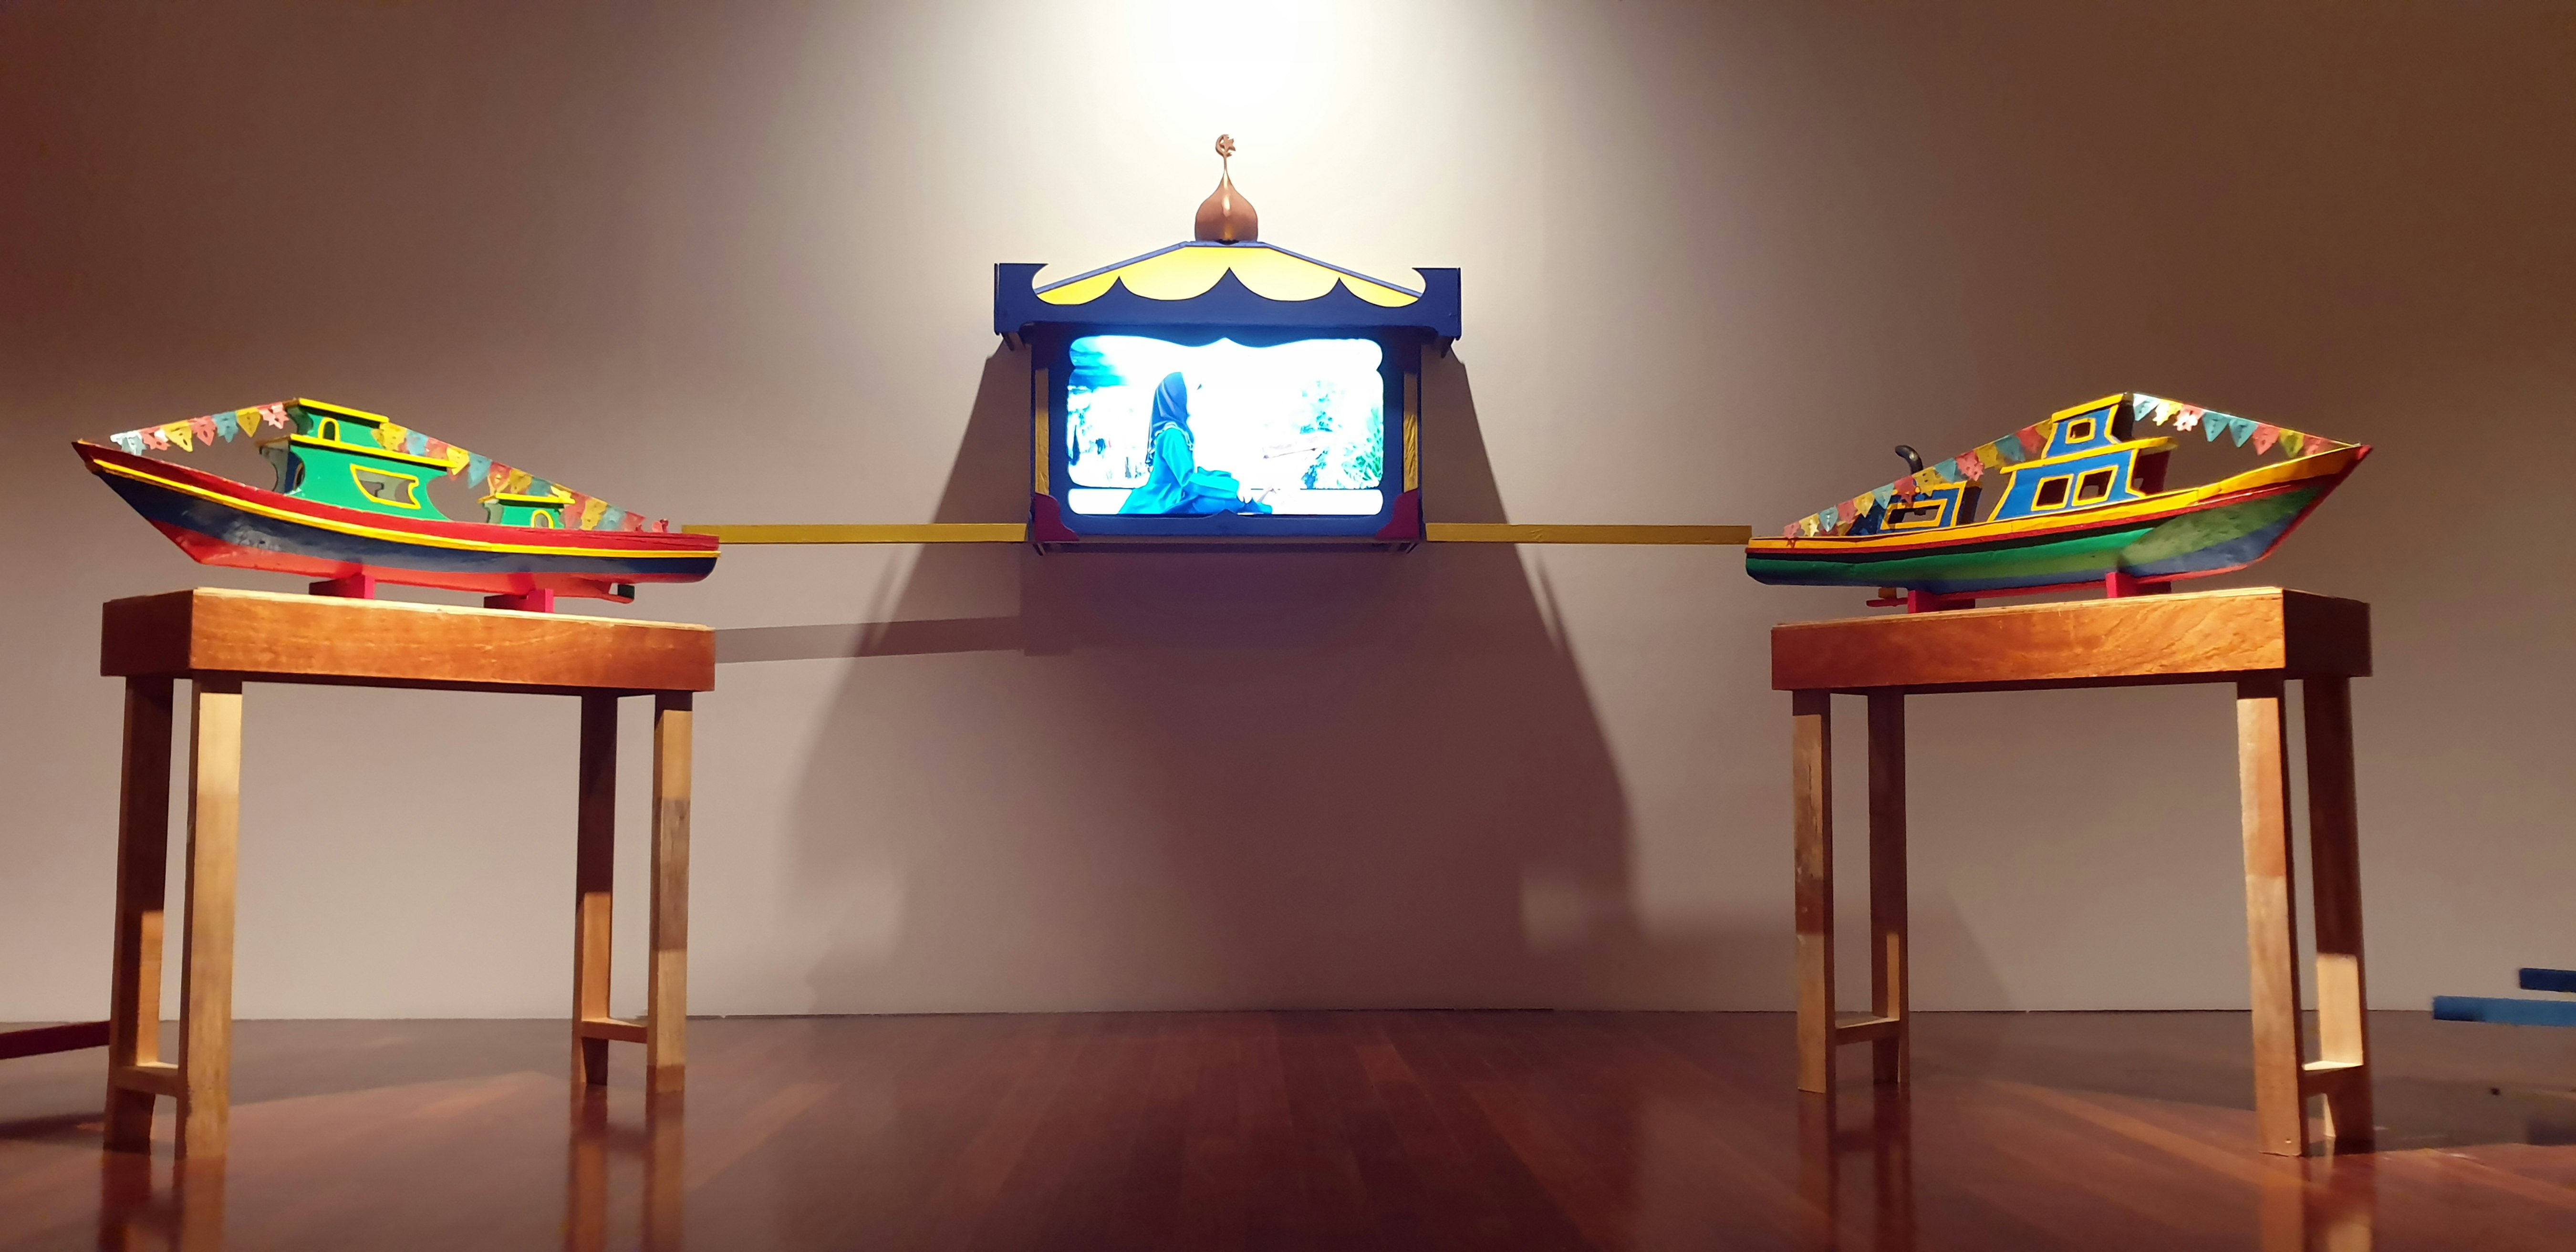 Video artwork nestled between two sculptures resembling usungans placed on wooden tables.